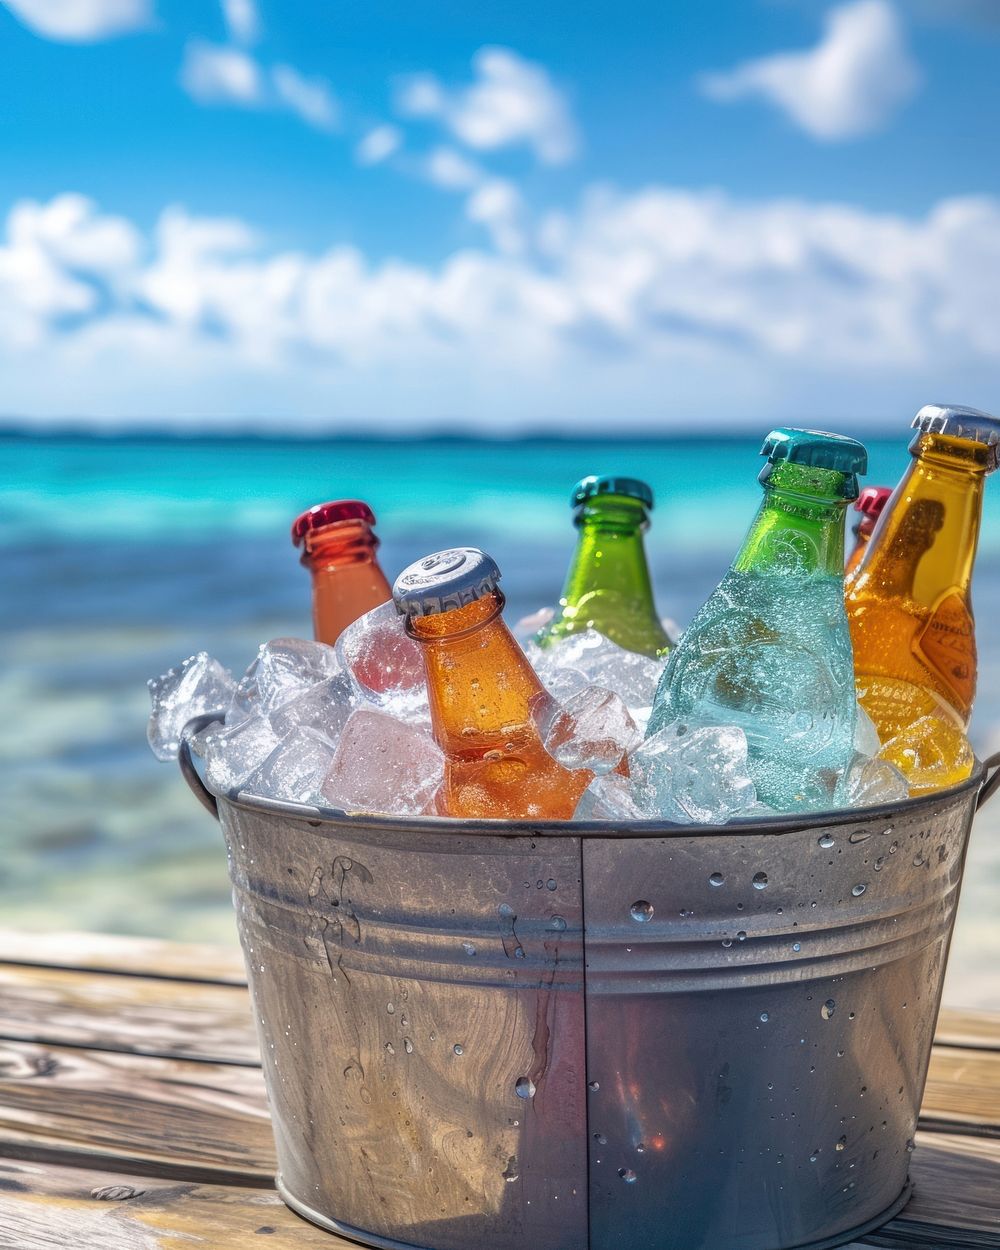 Assorted soda bottles in a metal bucket full of ice put on wood table against beach view vacation summer drink.